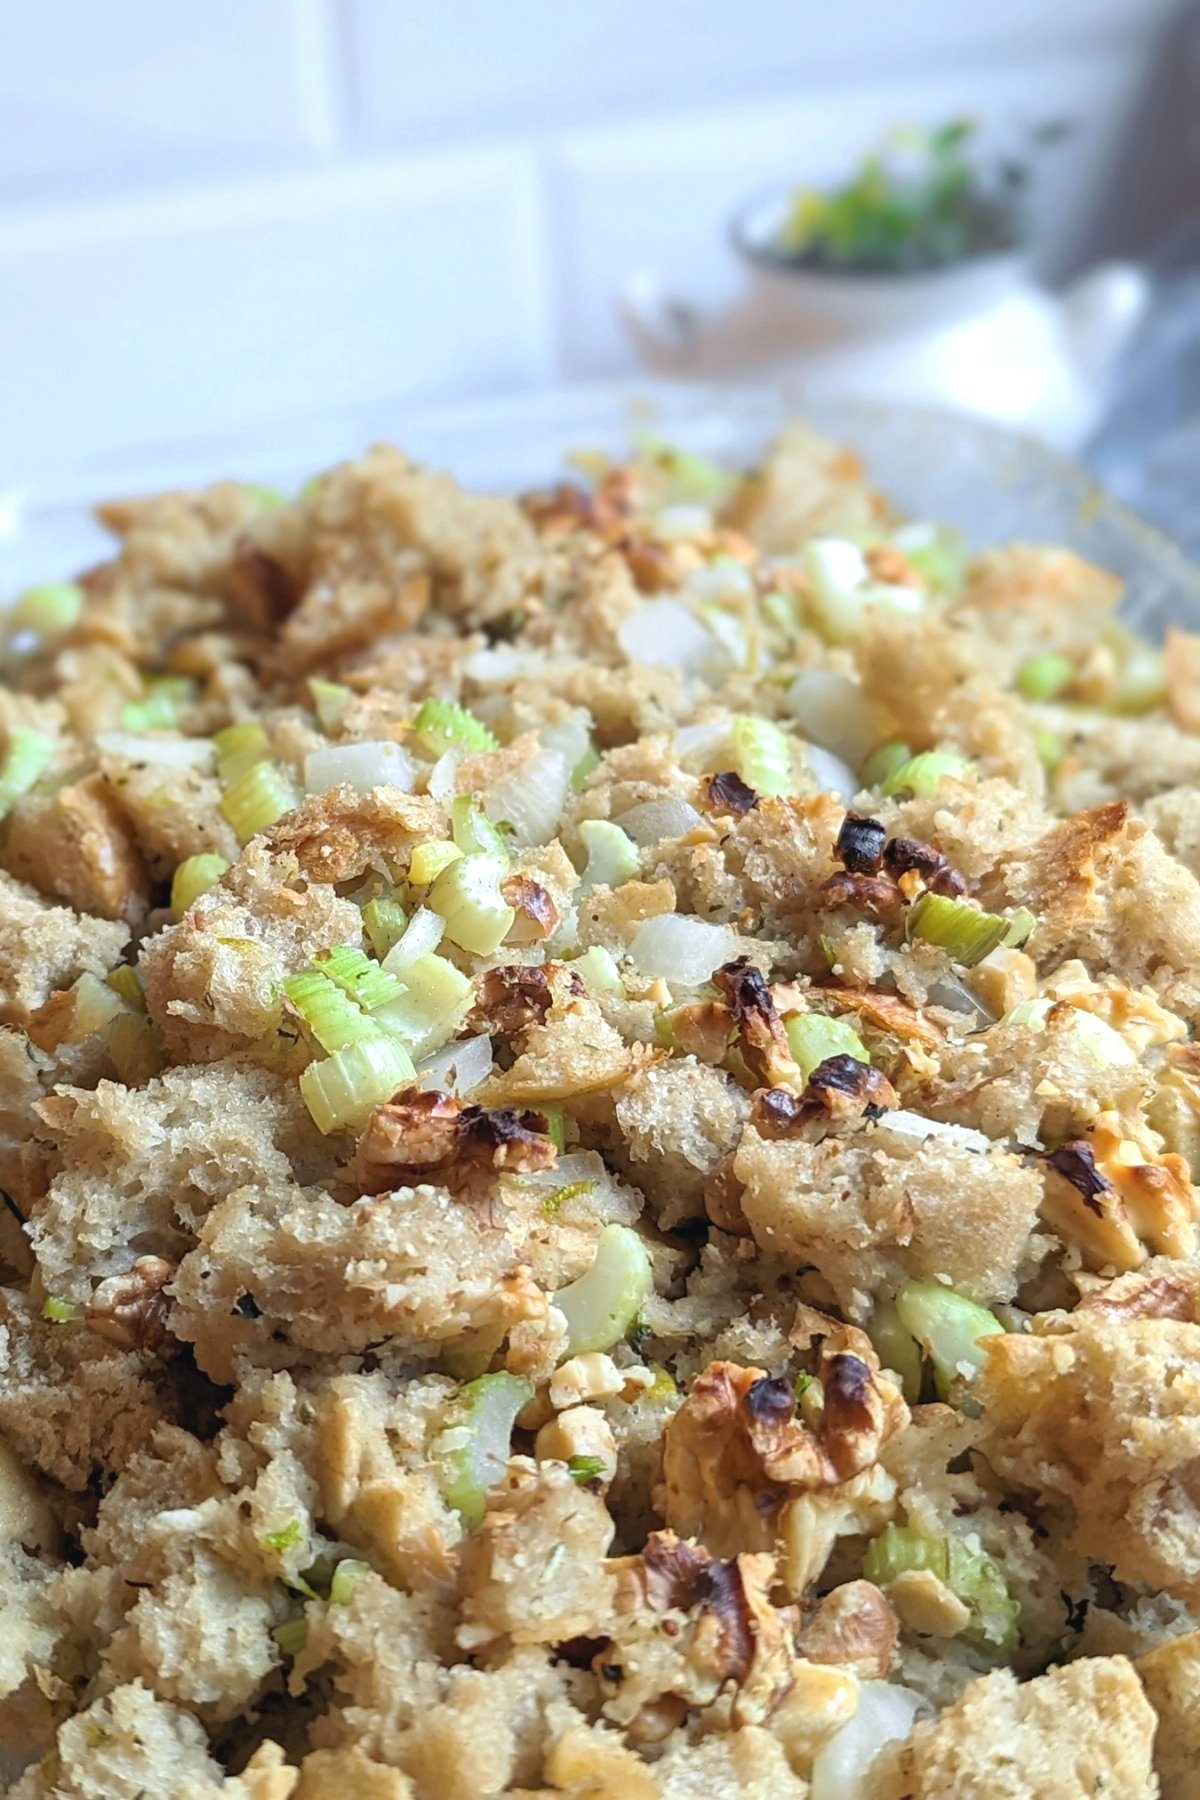 wheat bread stuffing recipe healthy thanksgiving side dishes with whole wheat bread stuffing ideas homemade